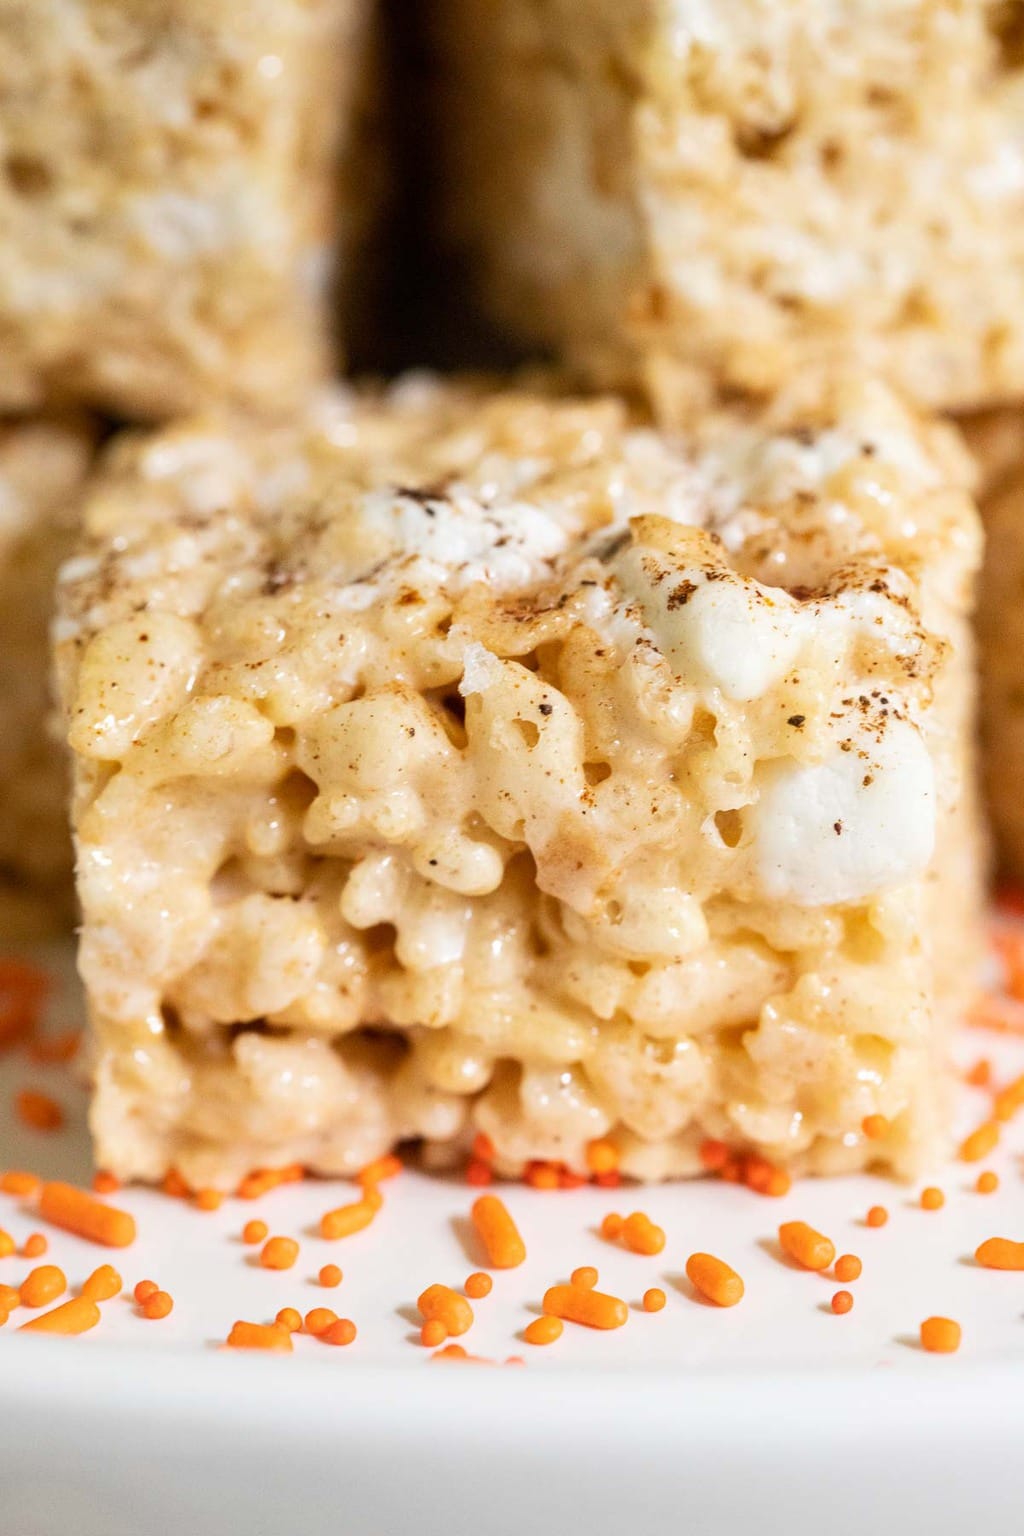 Vertical closeup photo of a plate of Pumpkin Spiced Brown Butter Rice Krispie Treats stacked on top of each other.